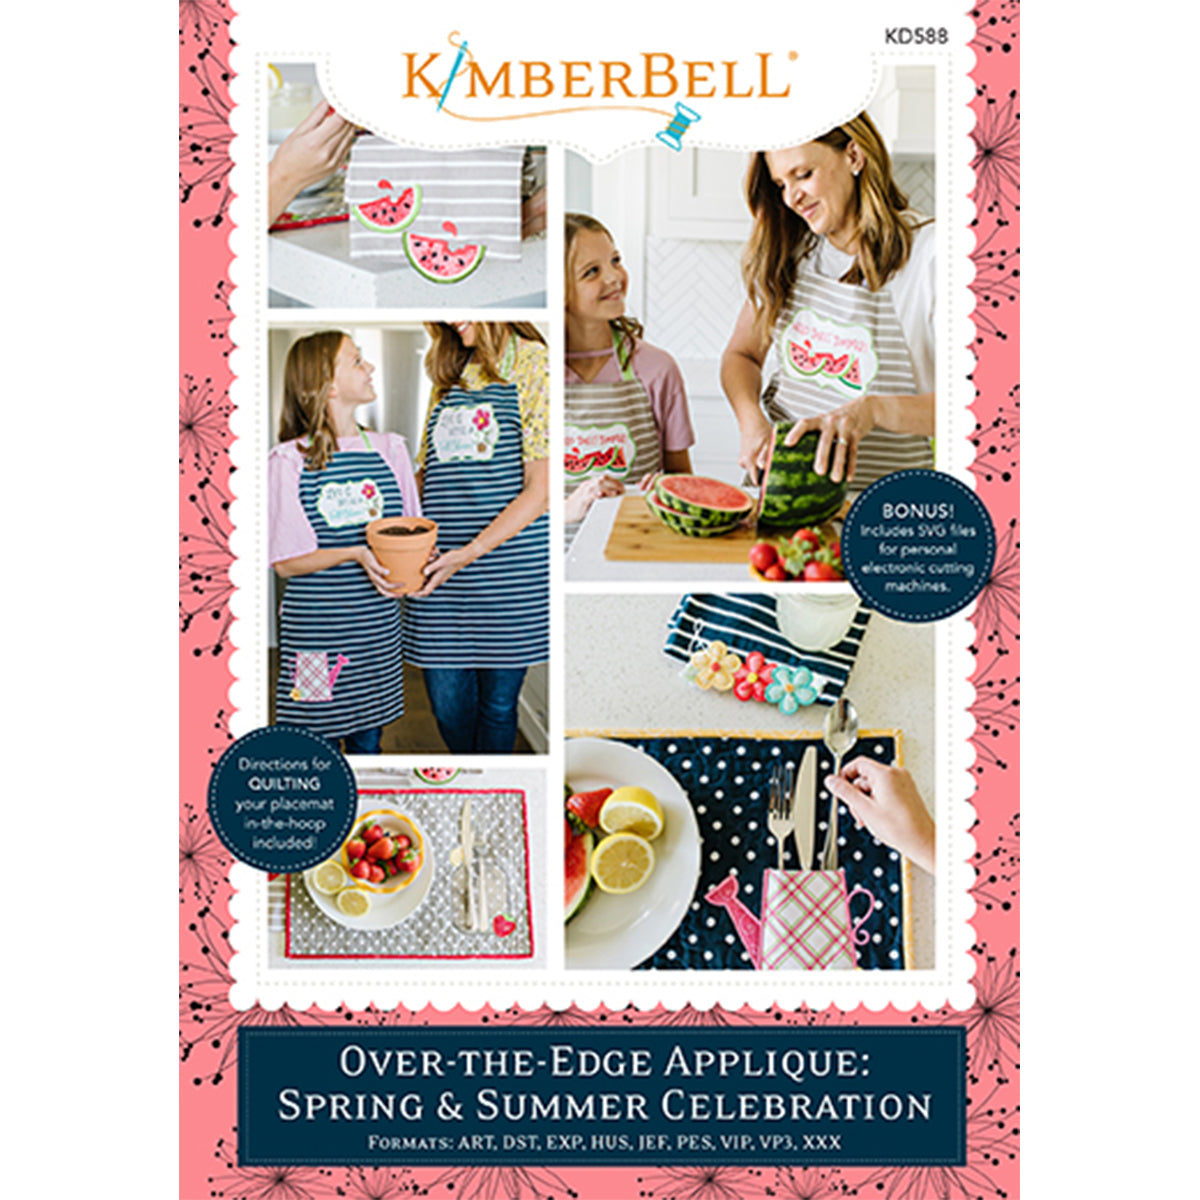 Kimberbell Over-the-Edge Applique: Spring & Summer Celebration Machine Embroidery CD